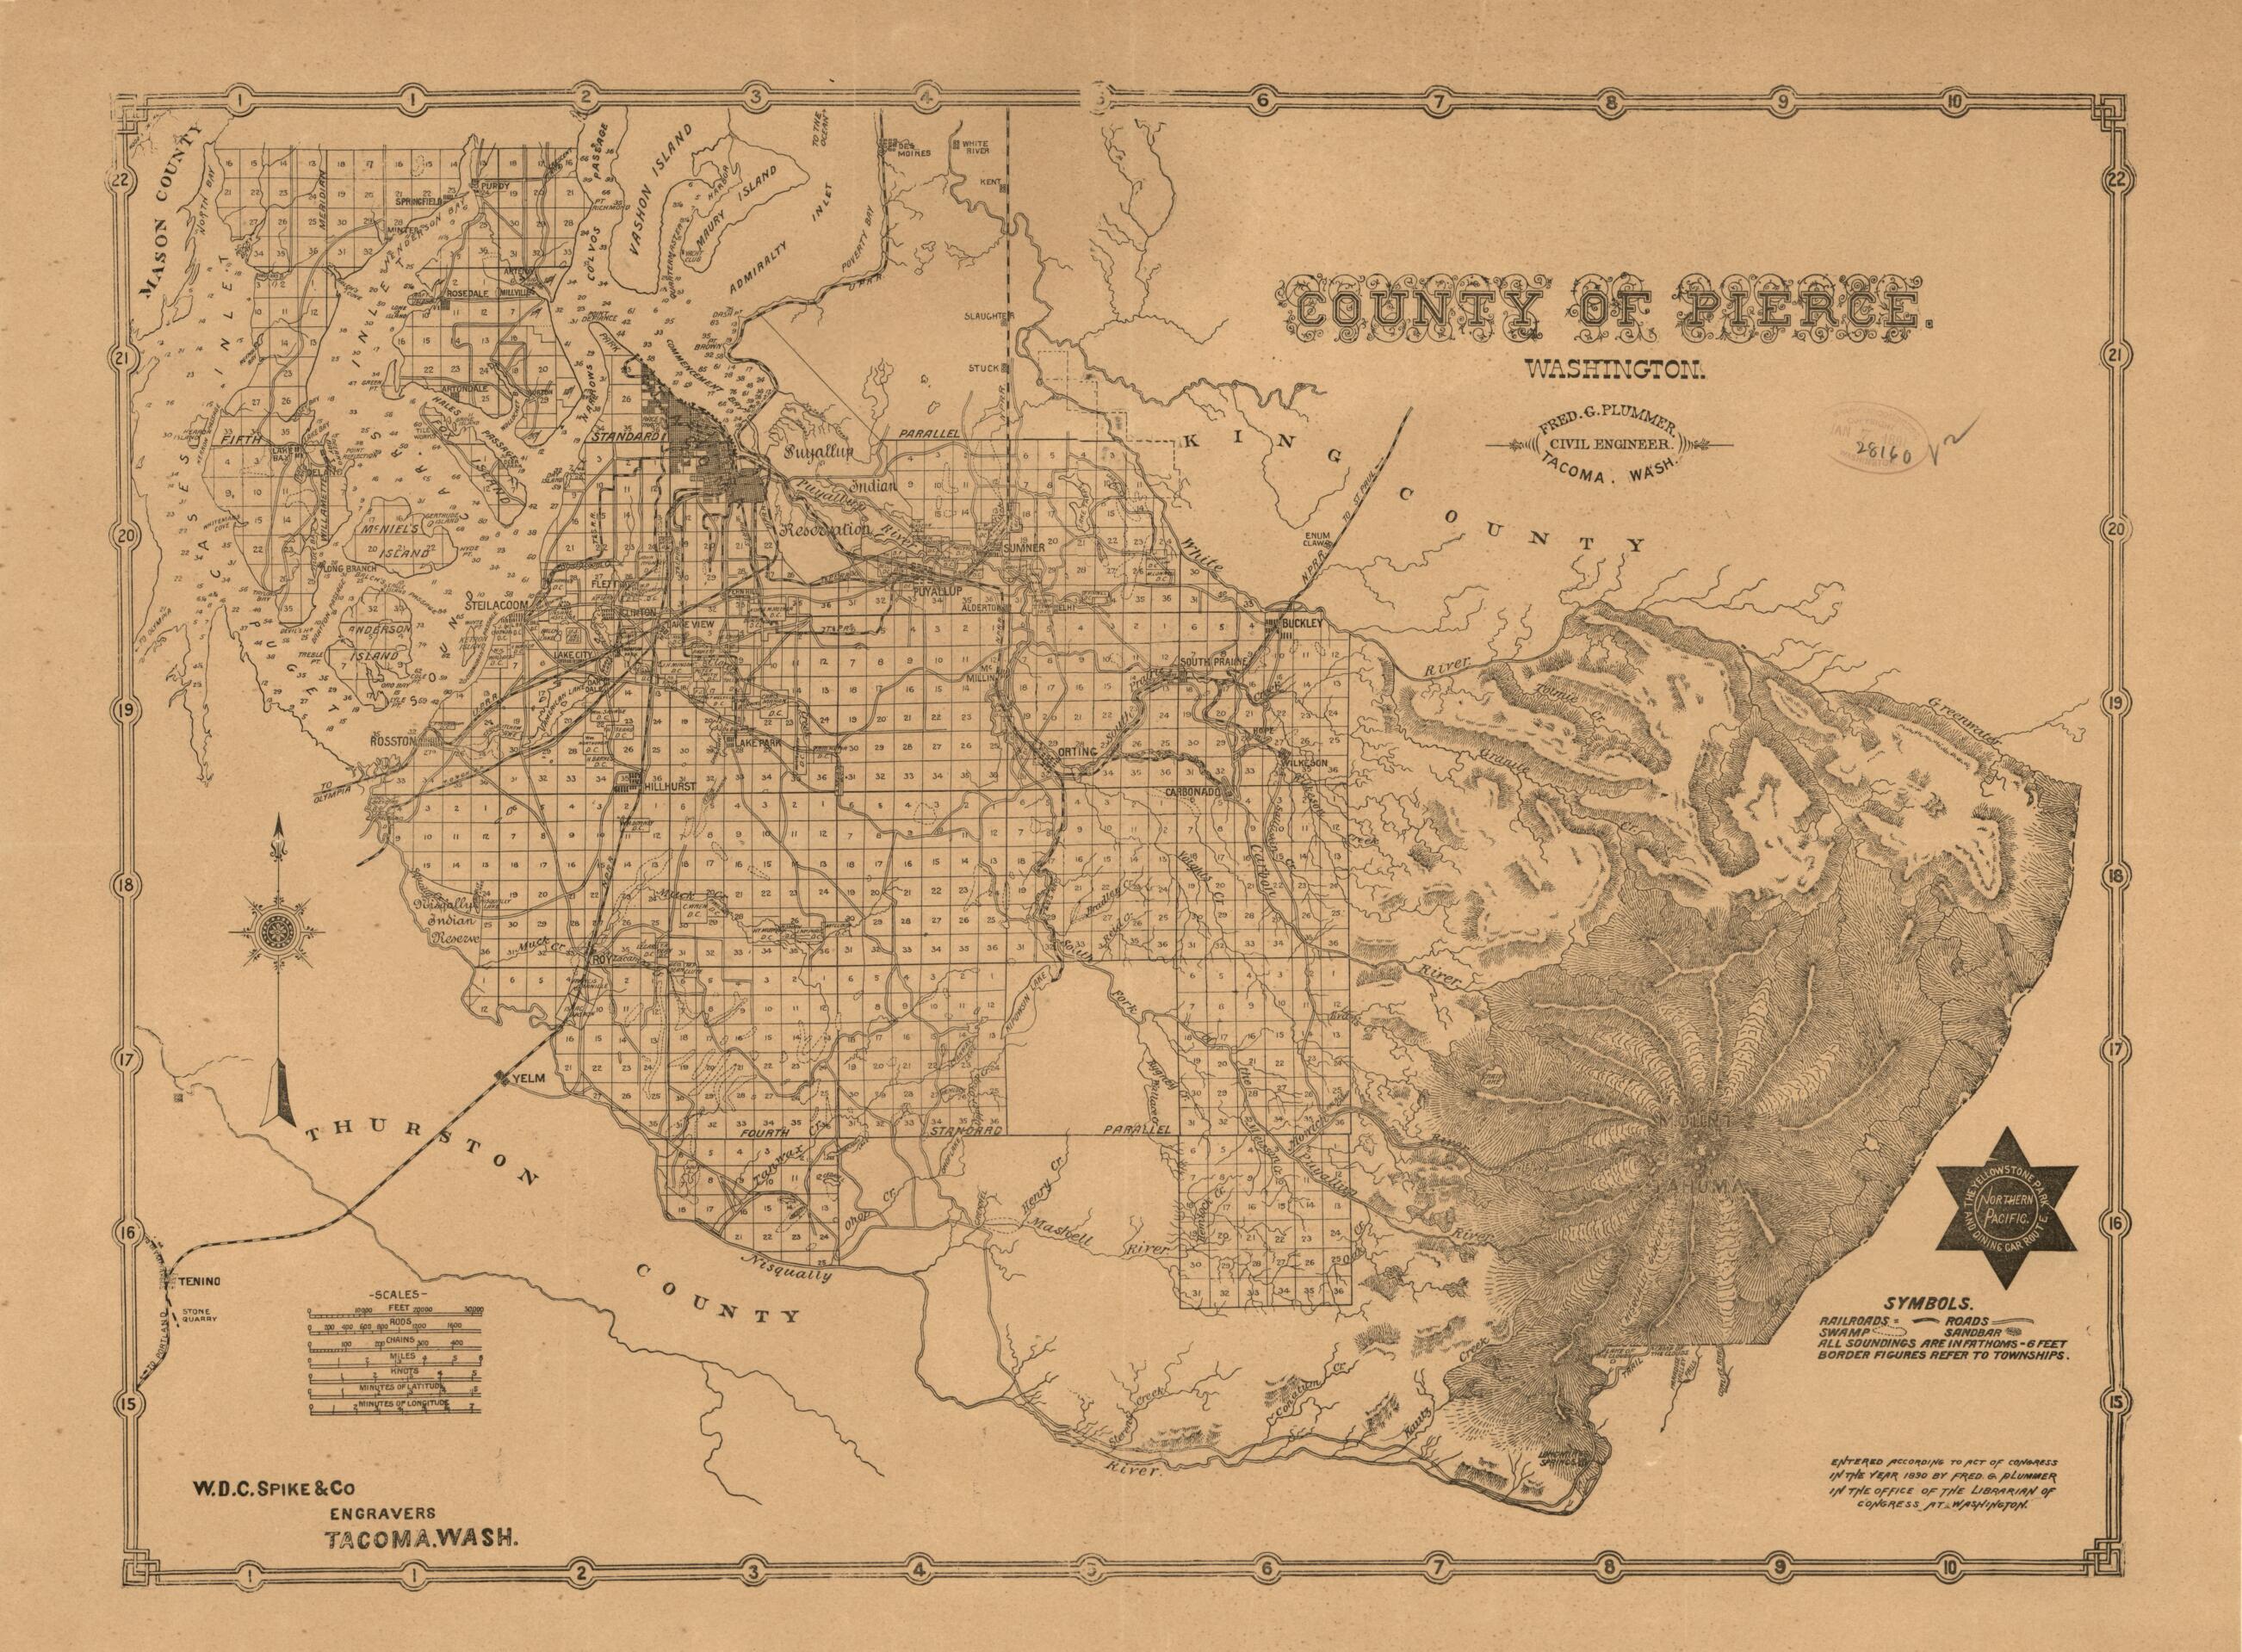 This old map of County of Pierce, Washington from 1890 was created by Fred G. (Fred Gordon) Plummer in 1890